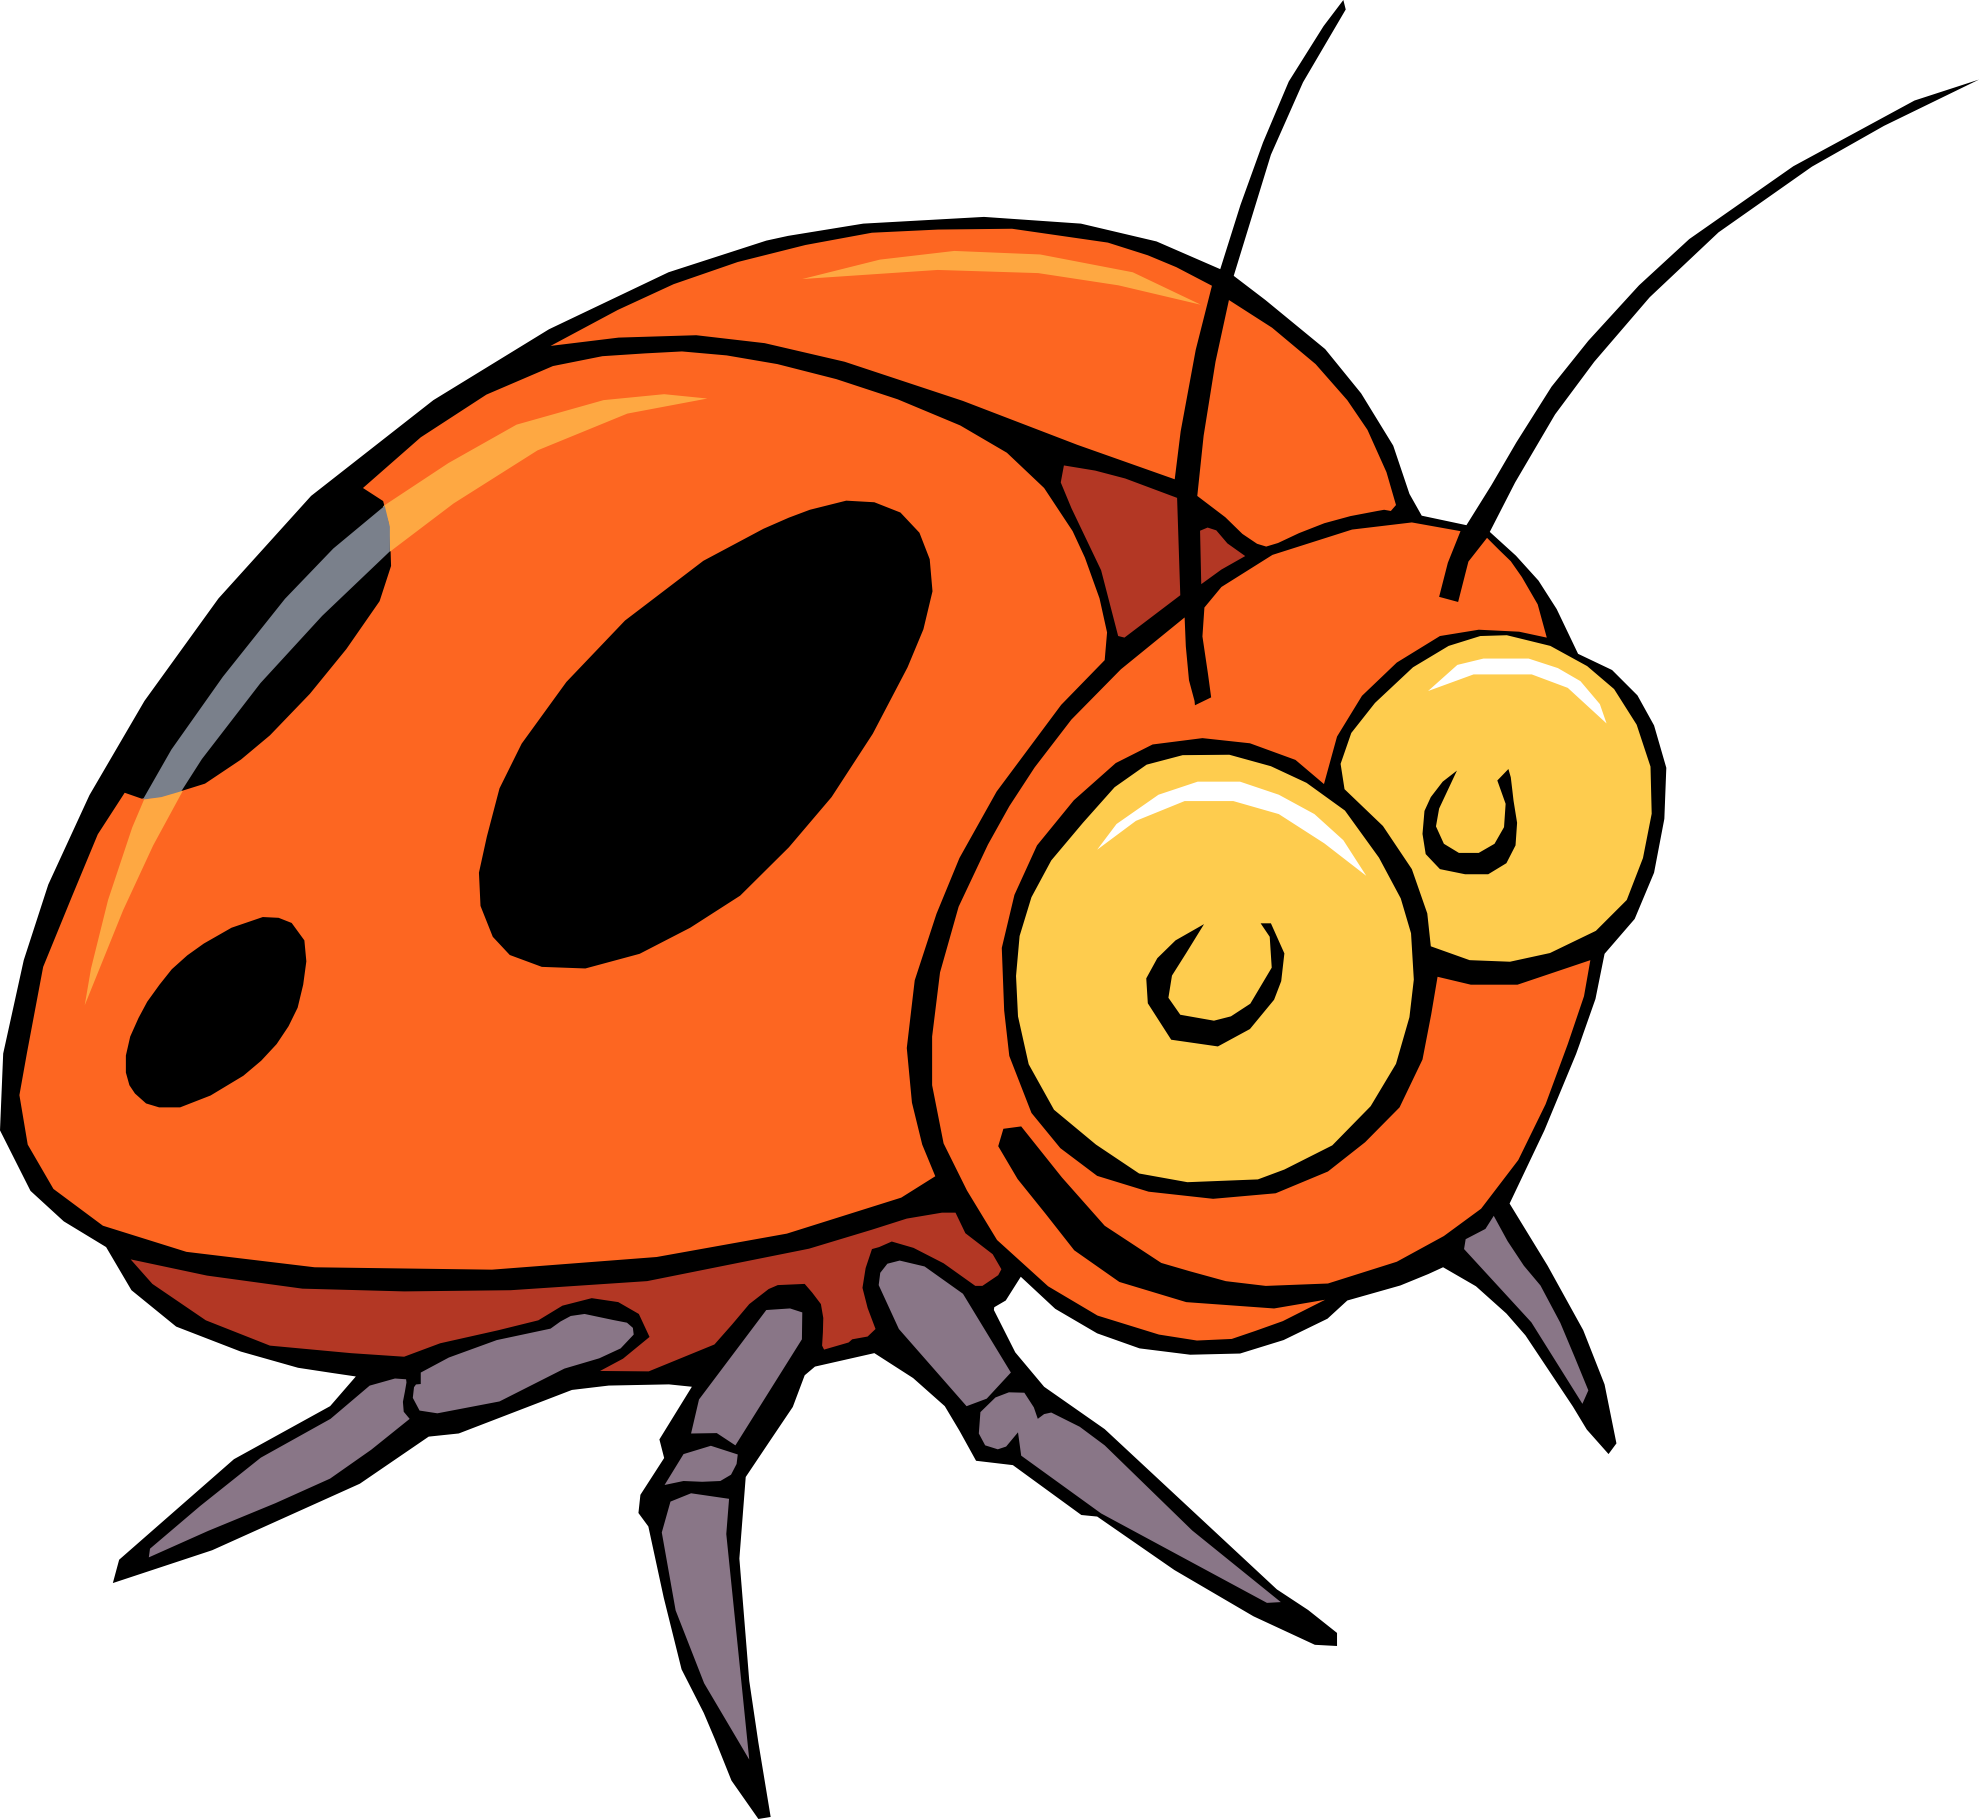 Bugs and insects clipart 